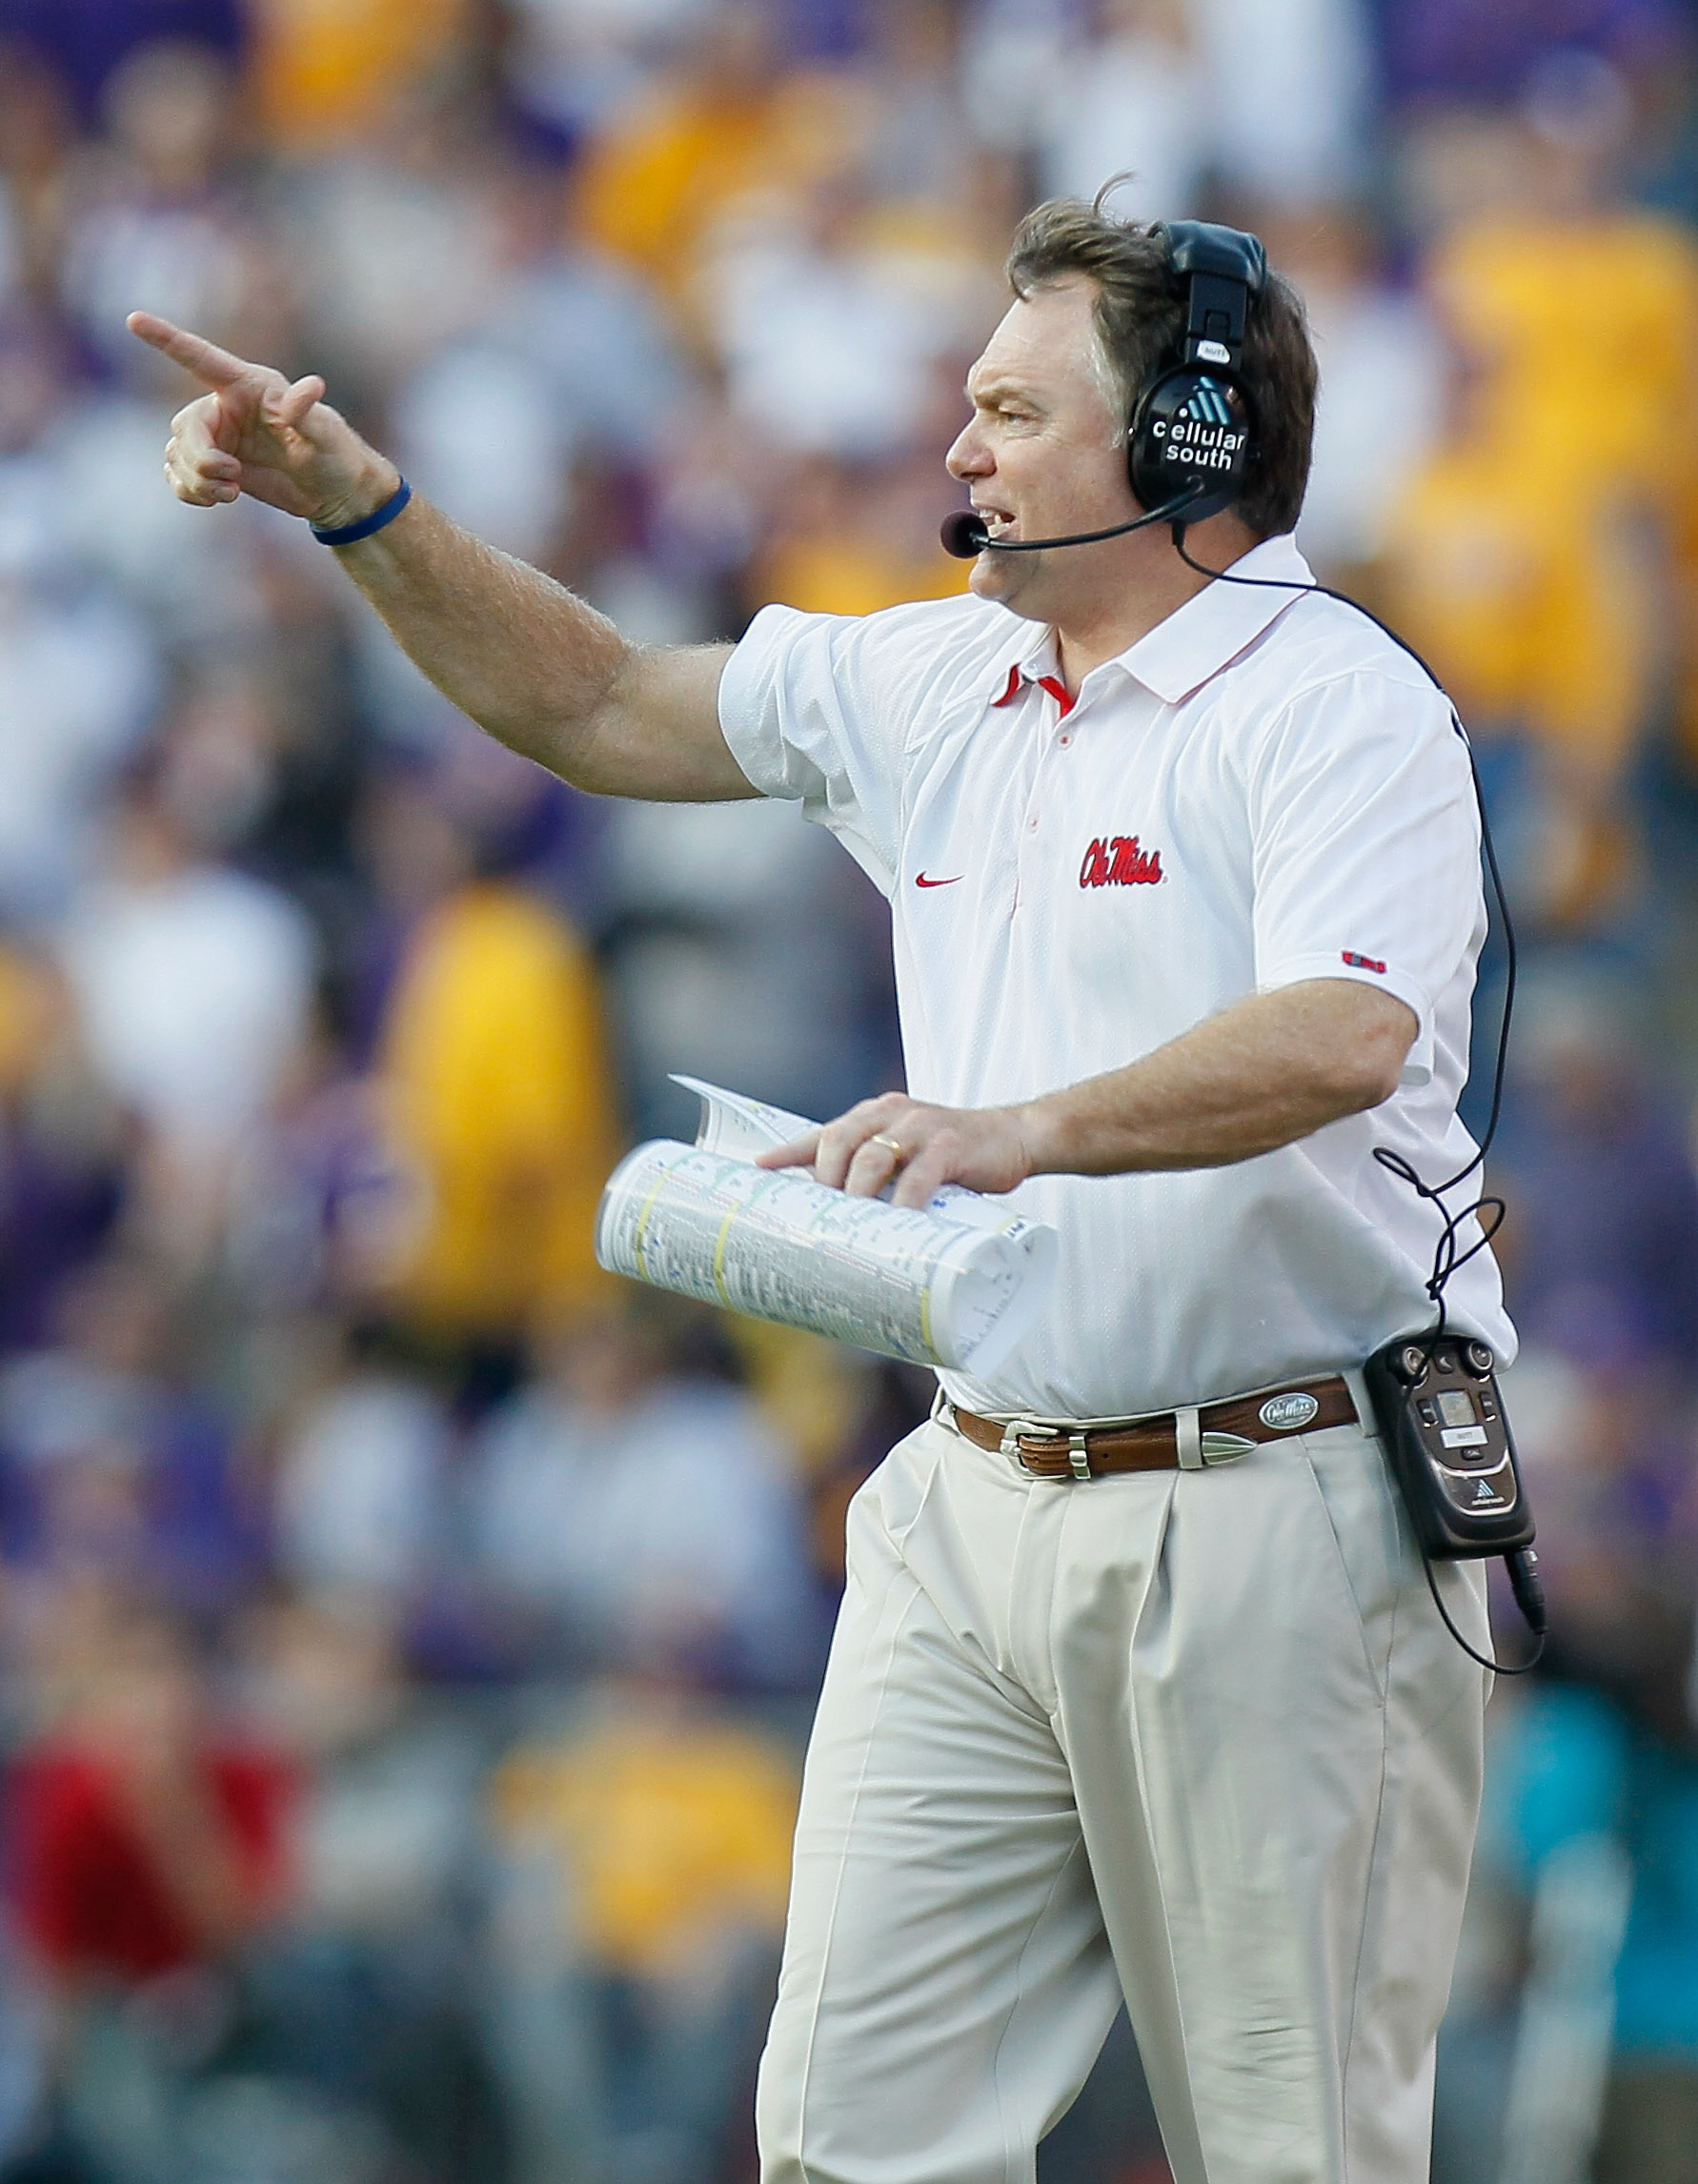 BATON ROUGE, LA - NOVEMBER 20:  Head coach Houston Nutt of the Ole Miss Rebels against the Louisiana State University Tigers at Tiger Stadium on November 20, 2010 in Baton Rouge, Louisiana.  (Photo by Kevin C. Cox/Getty Images)